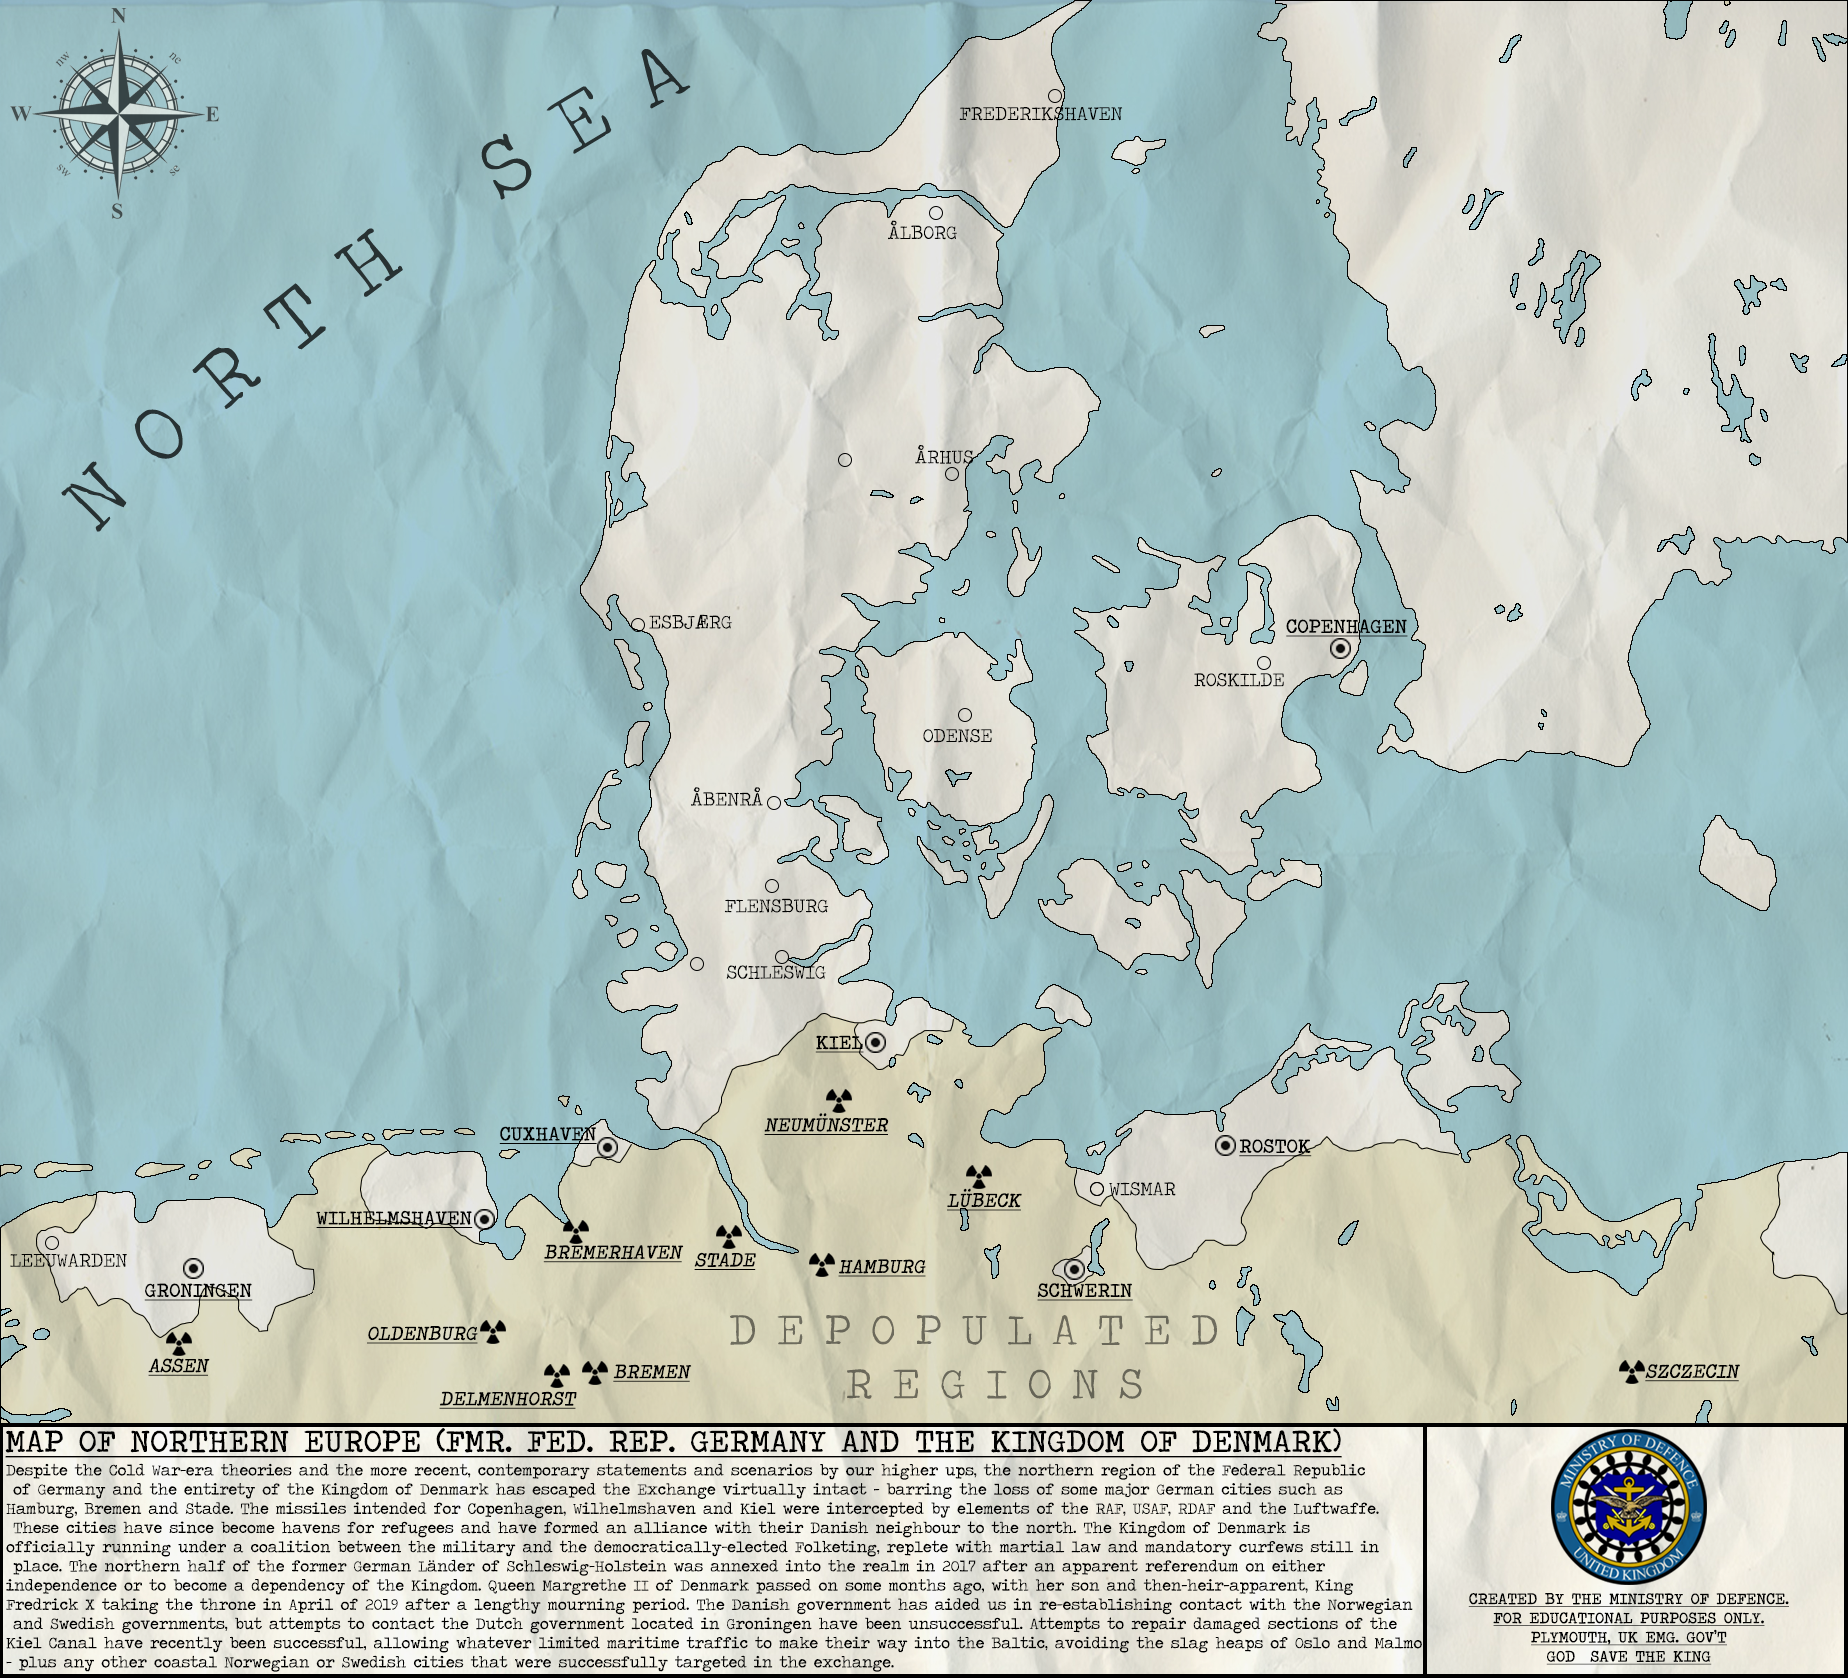 map_of_the_kingdom_of_denmark__plus_fmr__fgr__by_kitfisto1997-dbnnqma.png